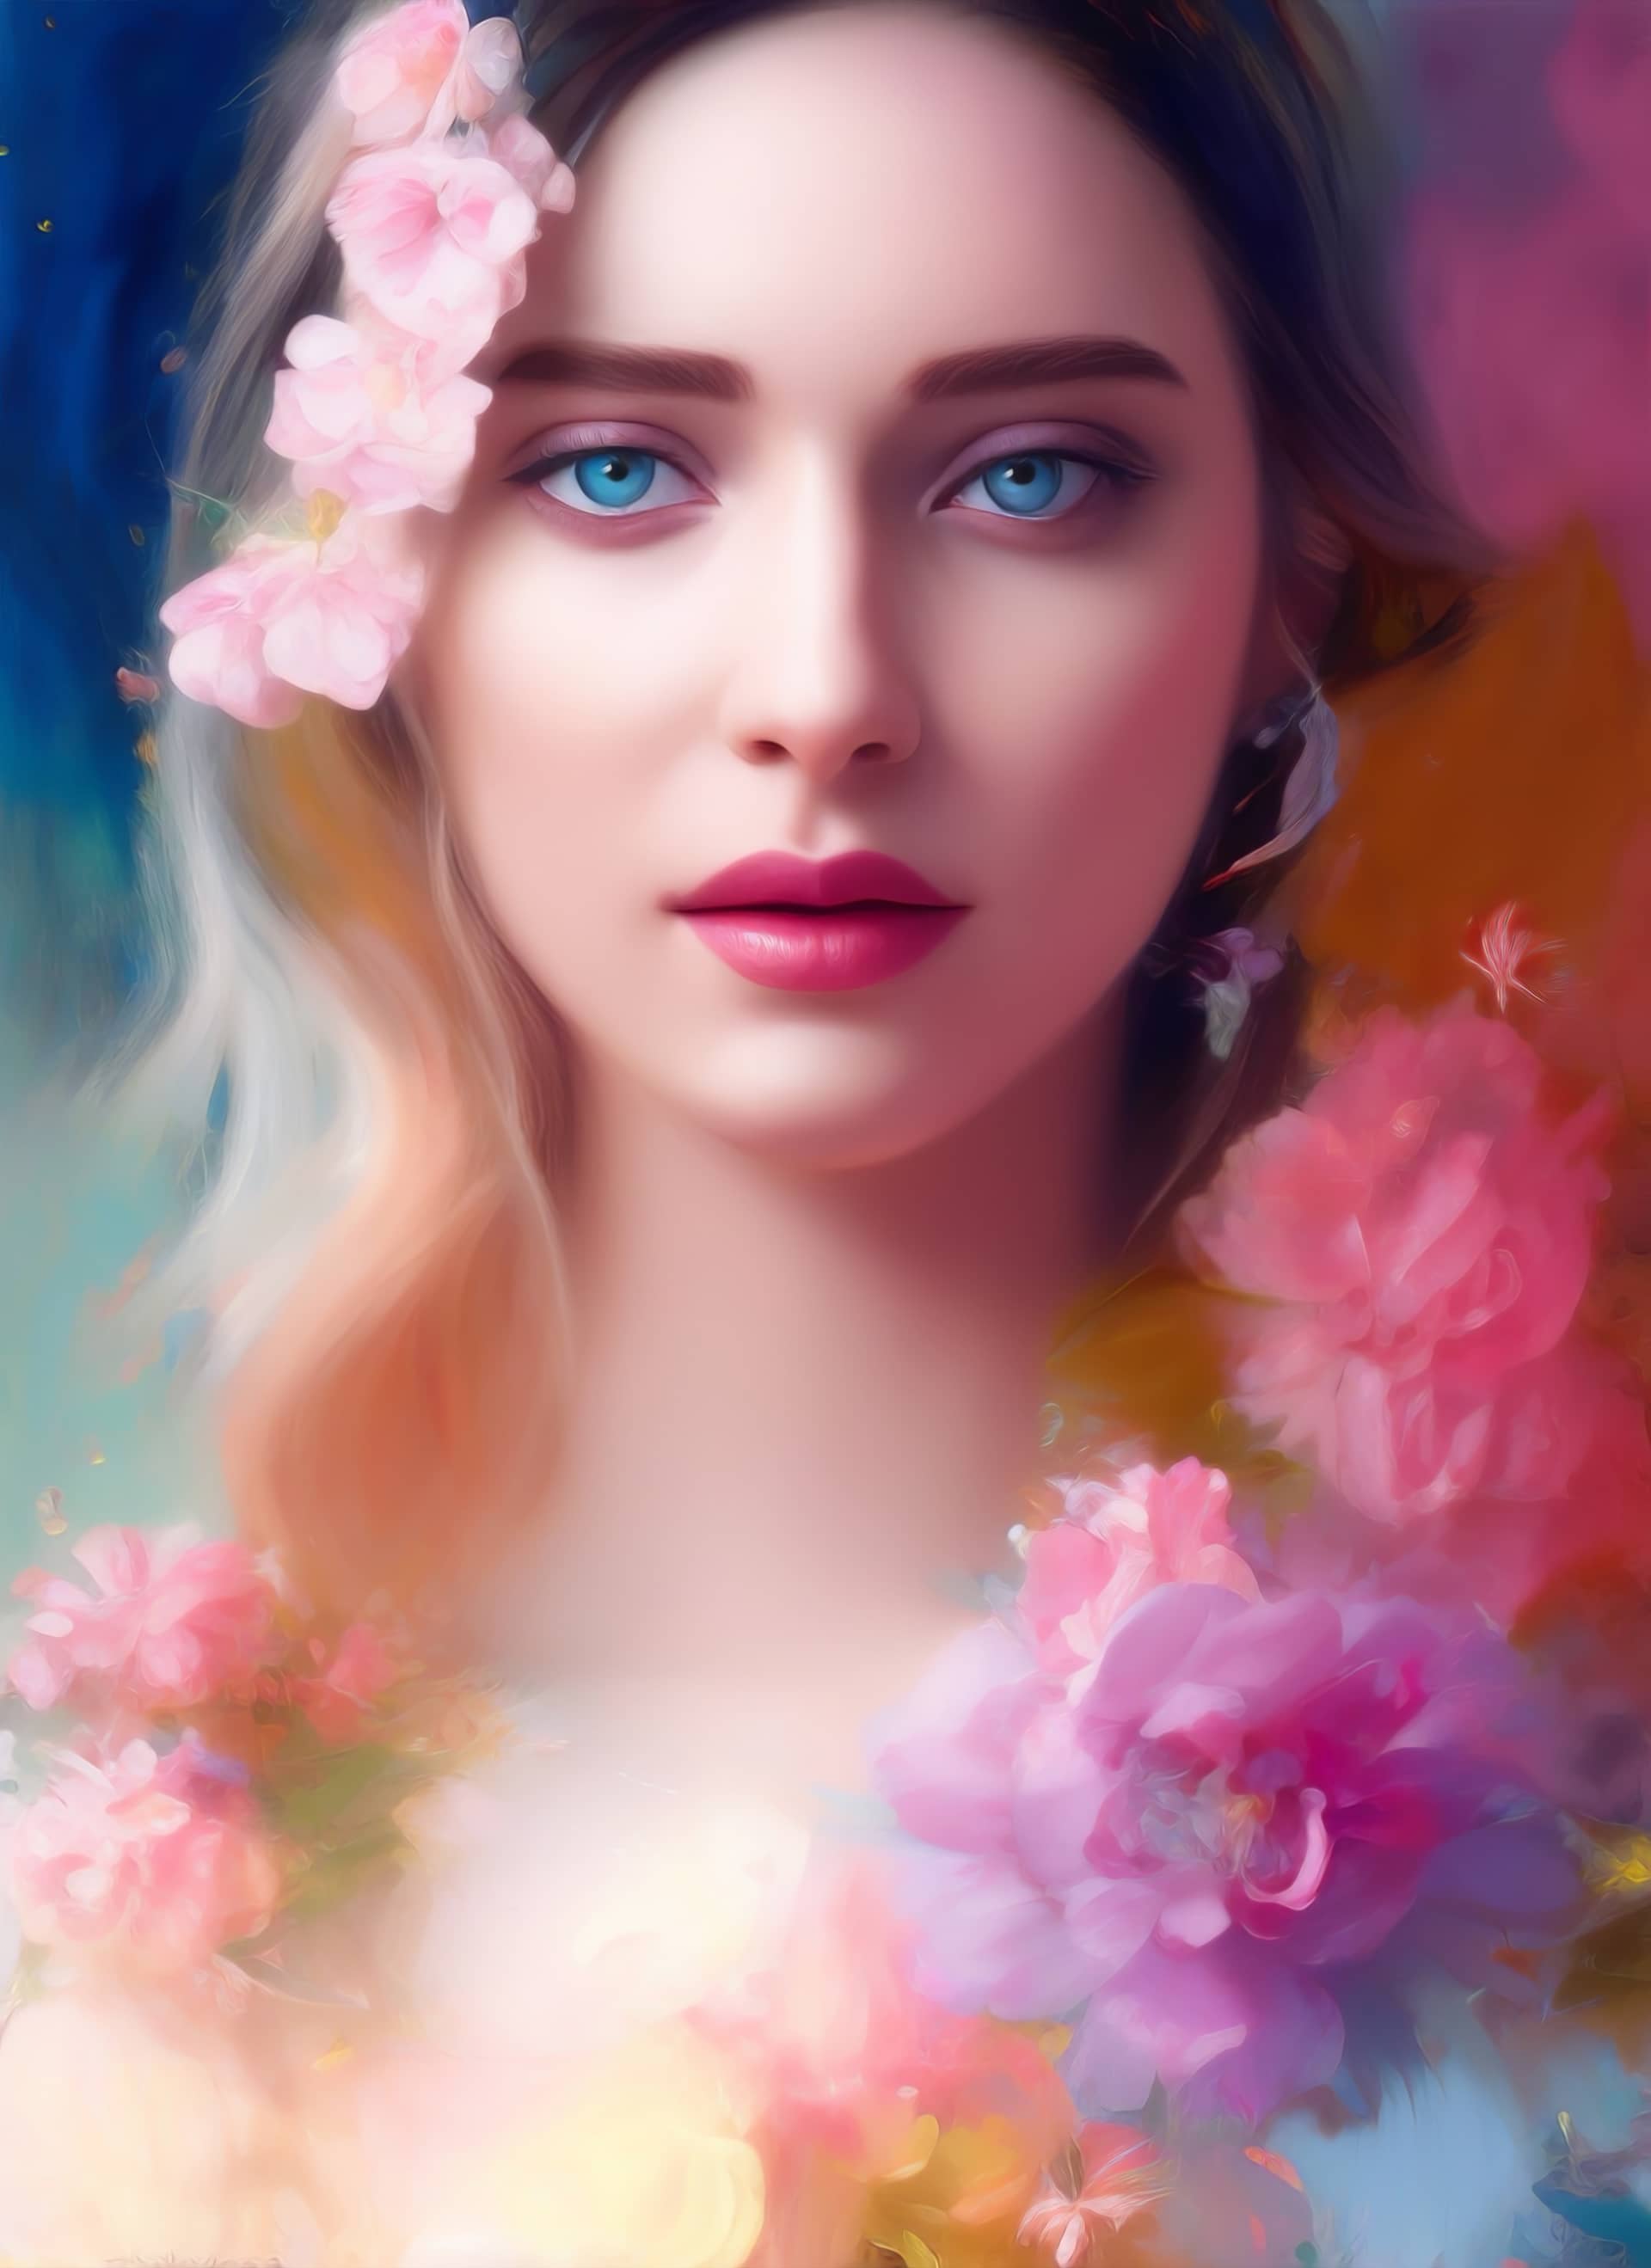 Colorful digital painting beautiful woman s portrait with flowers